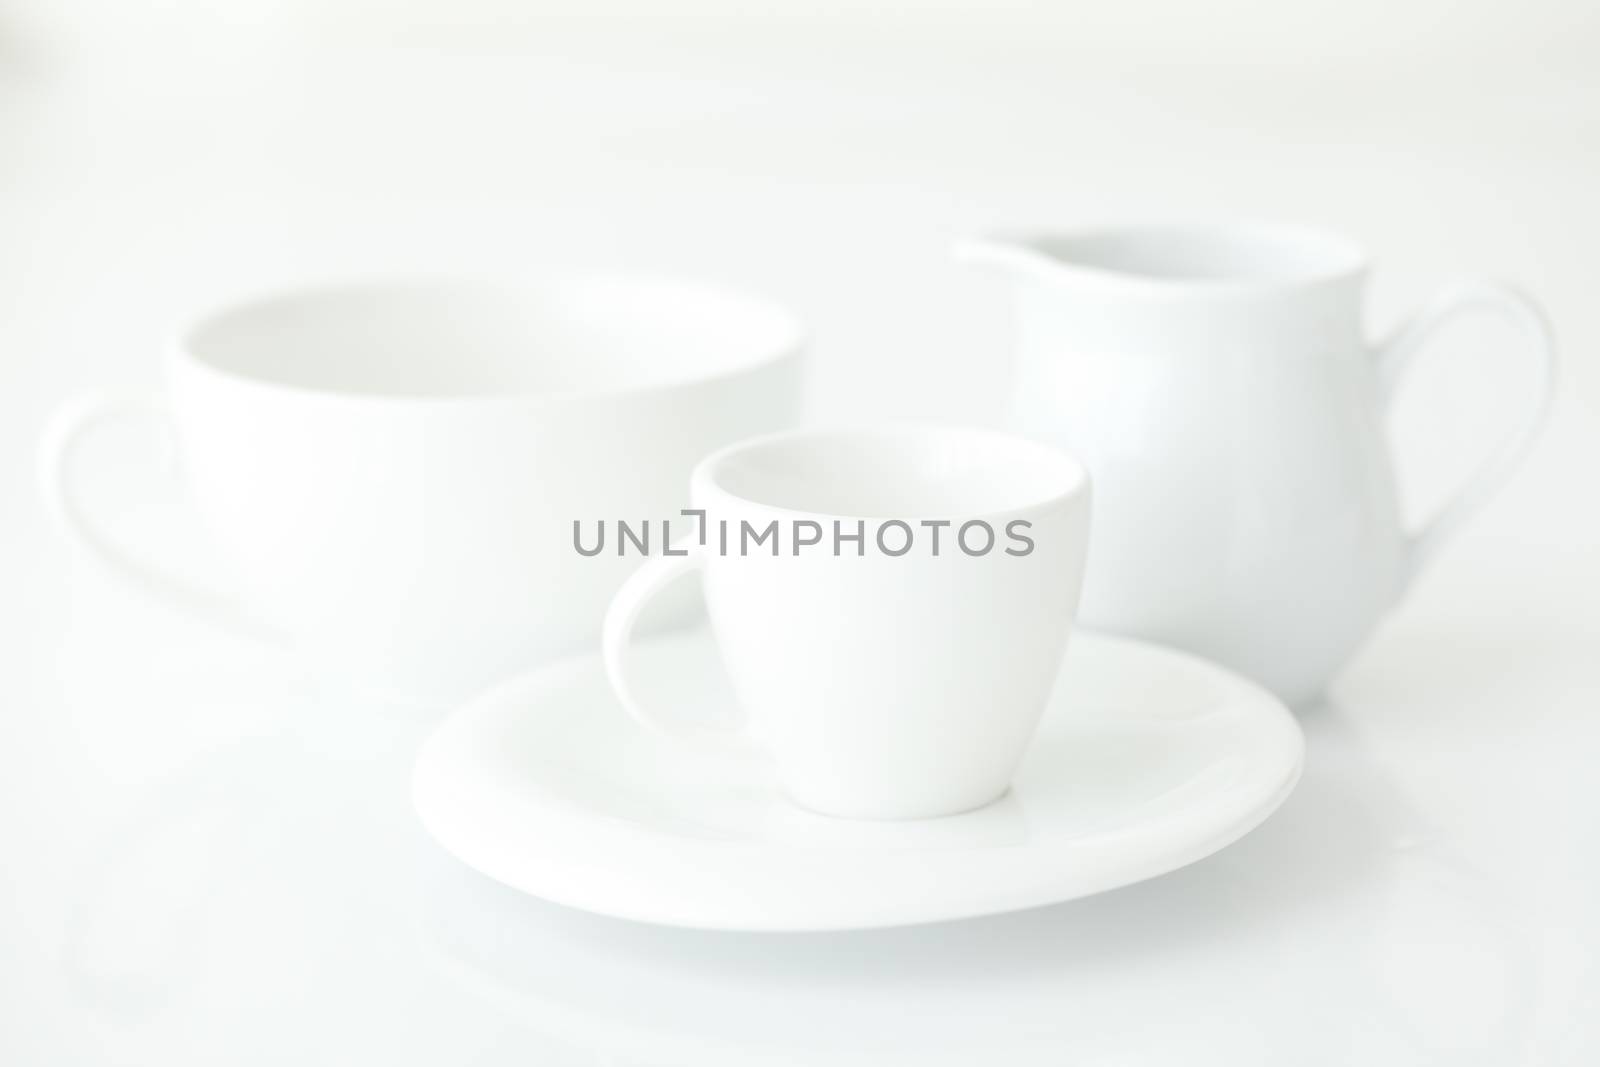 white cup with saucer and milk jug 